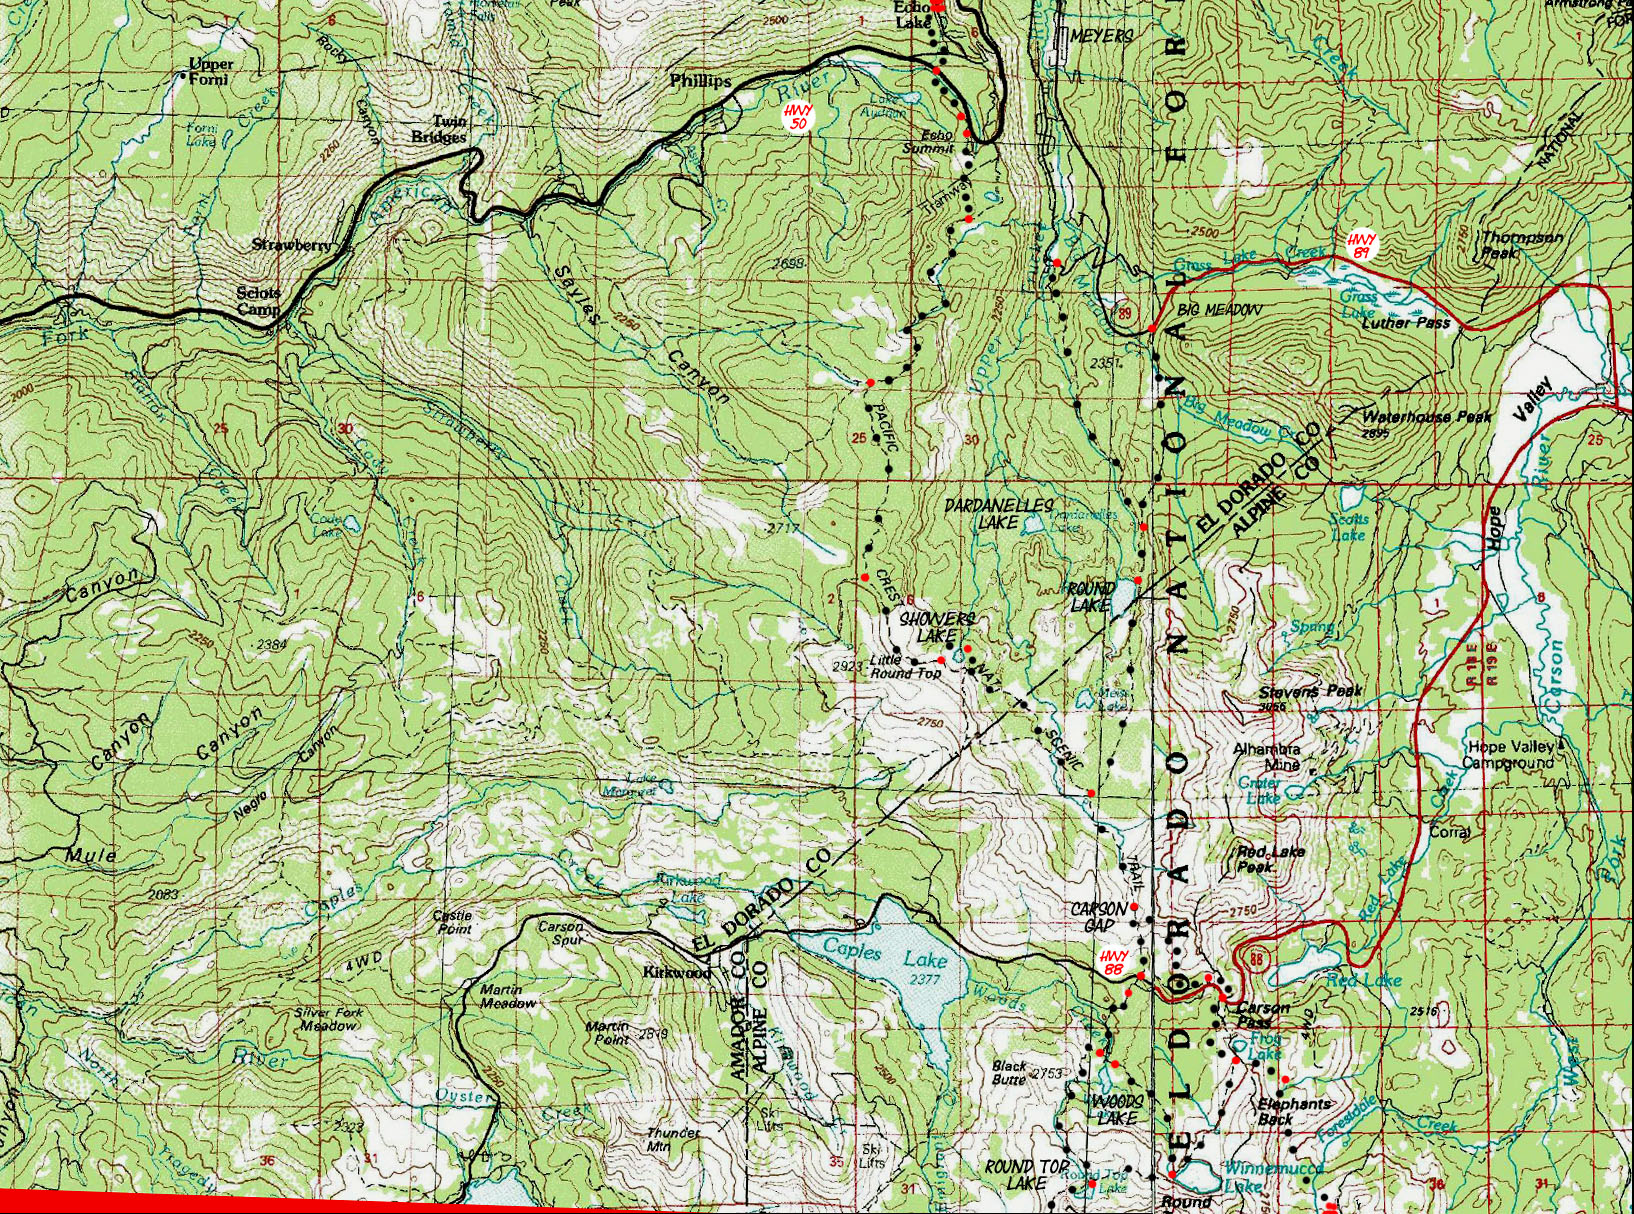 Topo hiking map of the Meiss Country Roadless Area and surrounding terrain.